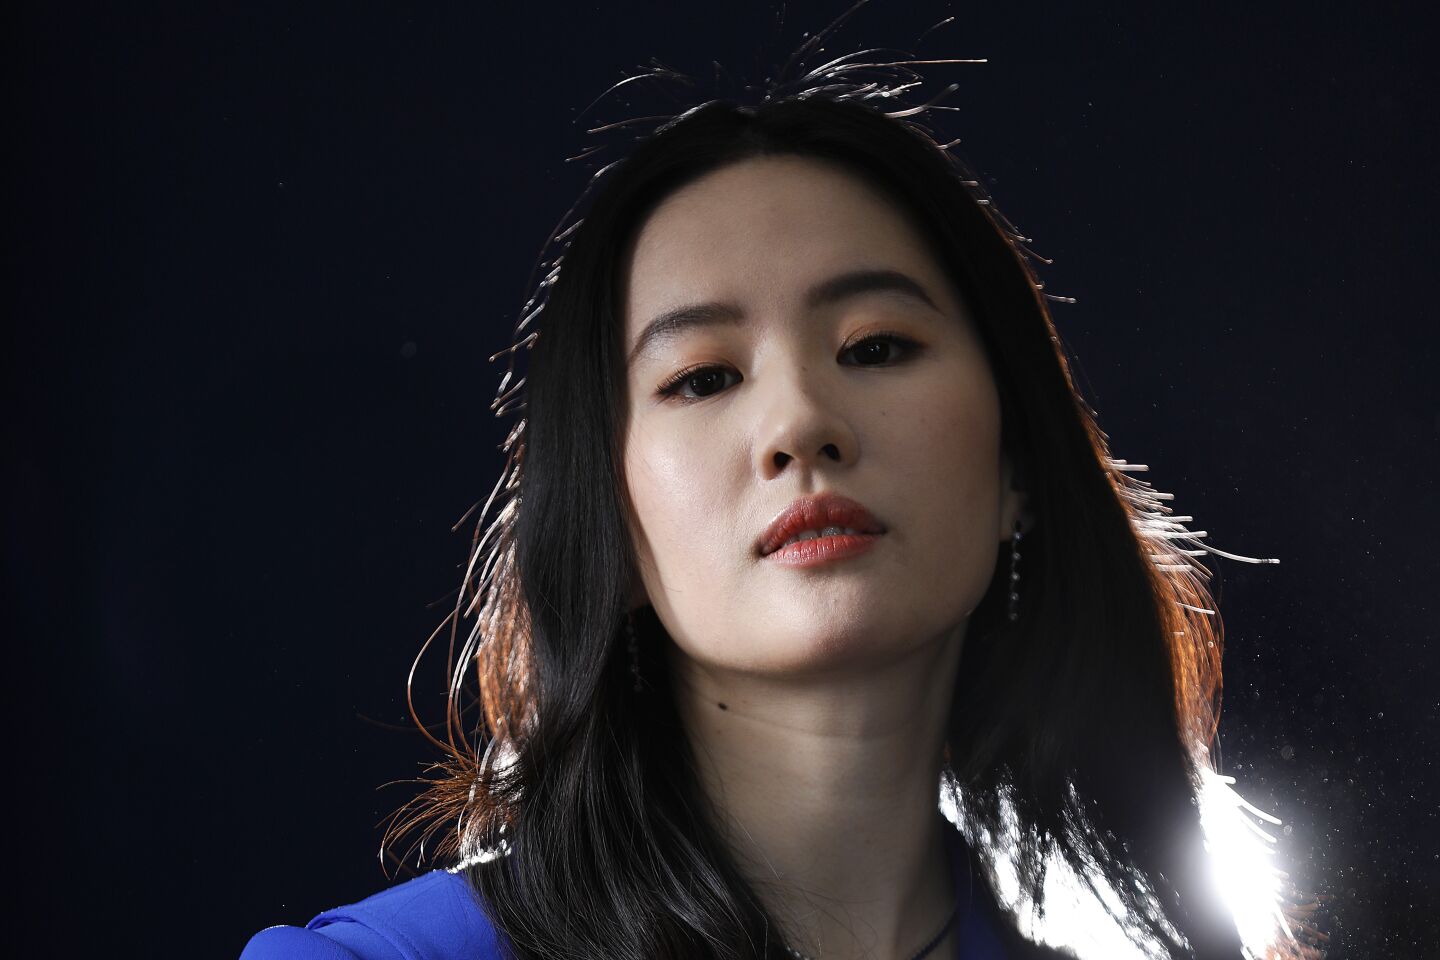 Liu Yifei is photographed at the InterContinental hotel in downtown Los Angeles on Sunday, March 8, 2020.